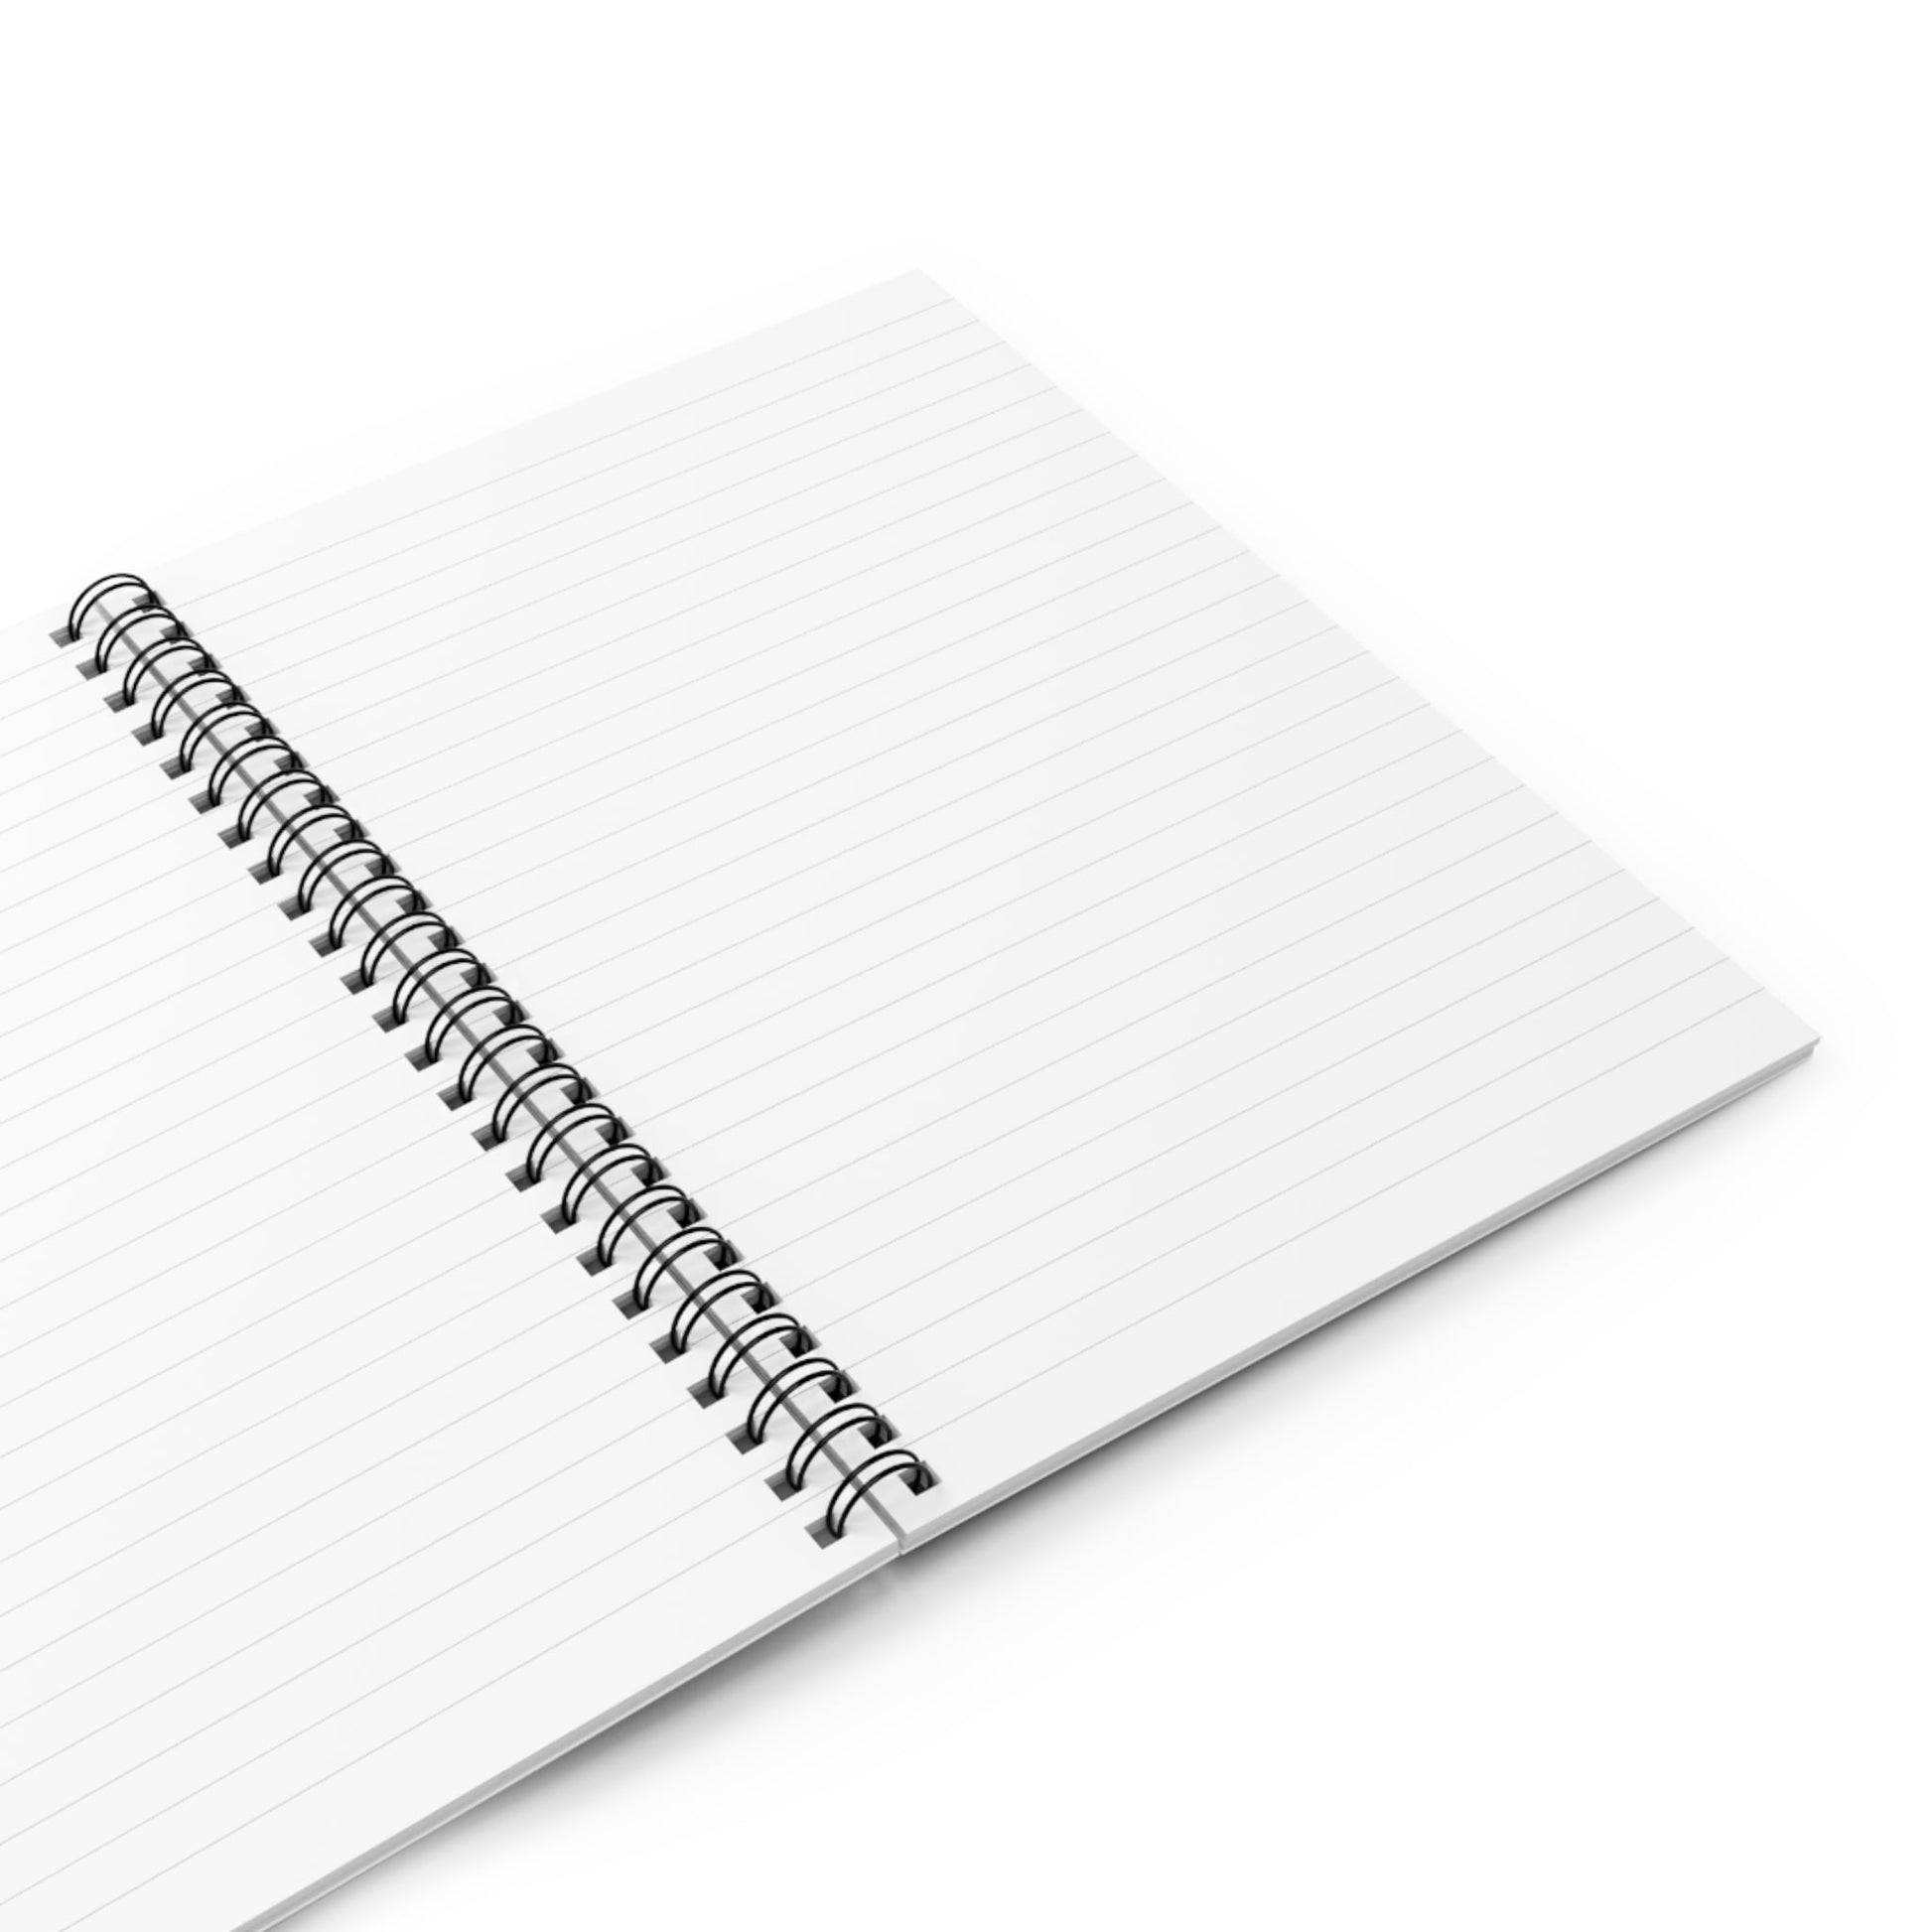 Spiral Notebook with Funny Alien Cover Opened with Blank White College Ruled Pages